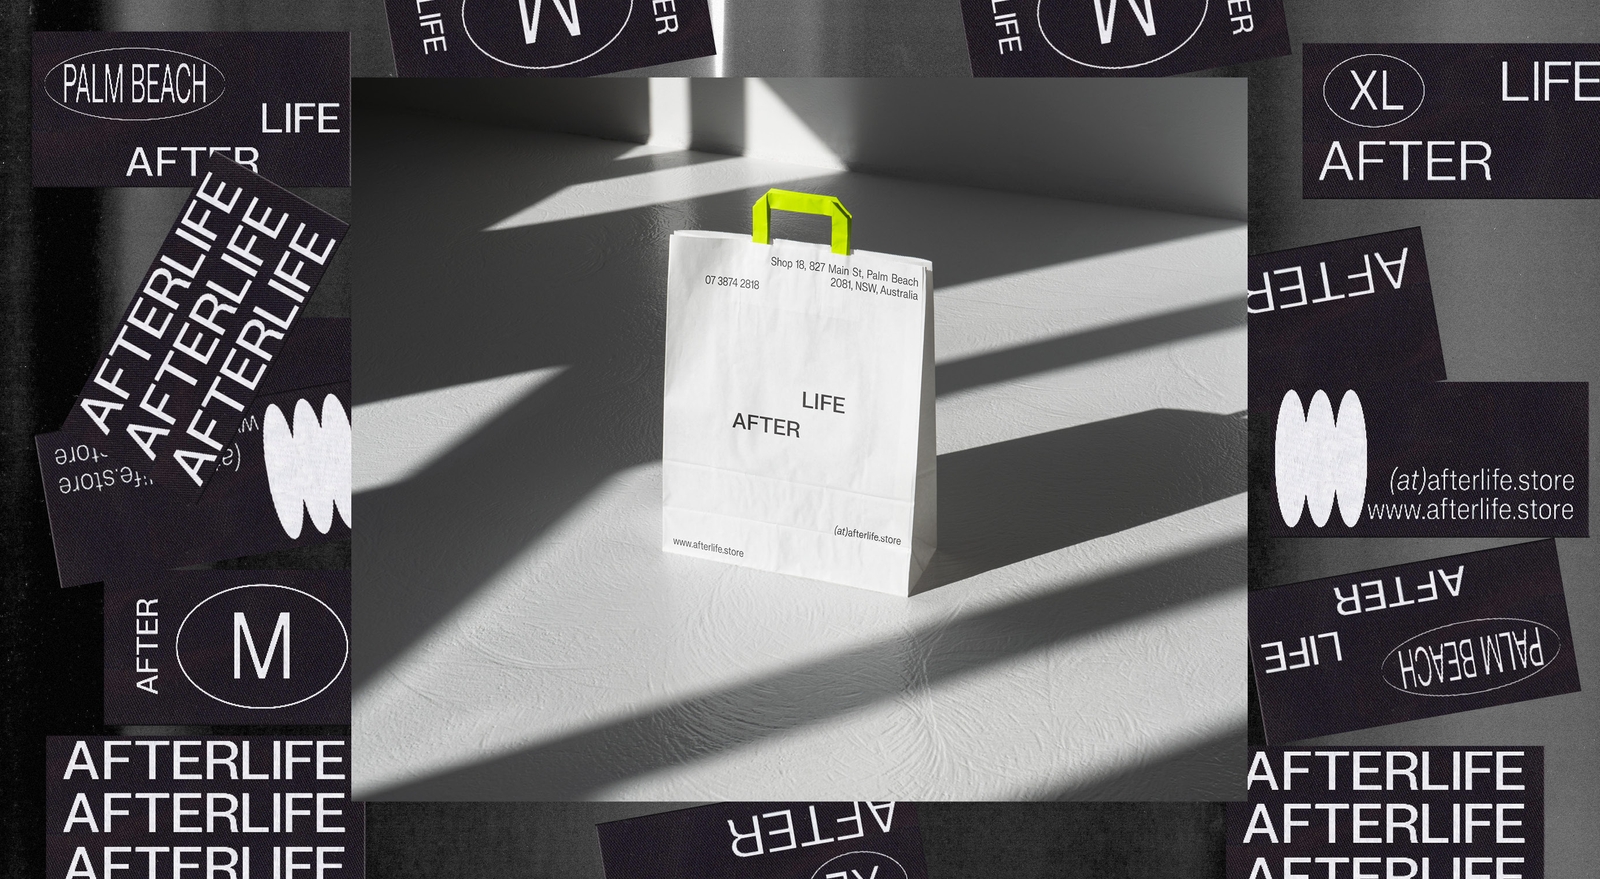 Afterlife - Store Paper Bag and stickers - Brandmark | Atollon - a design company